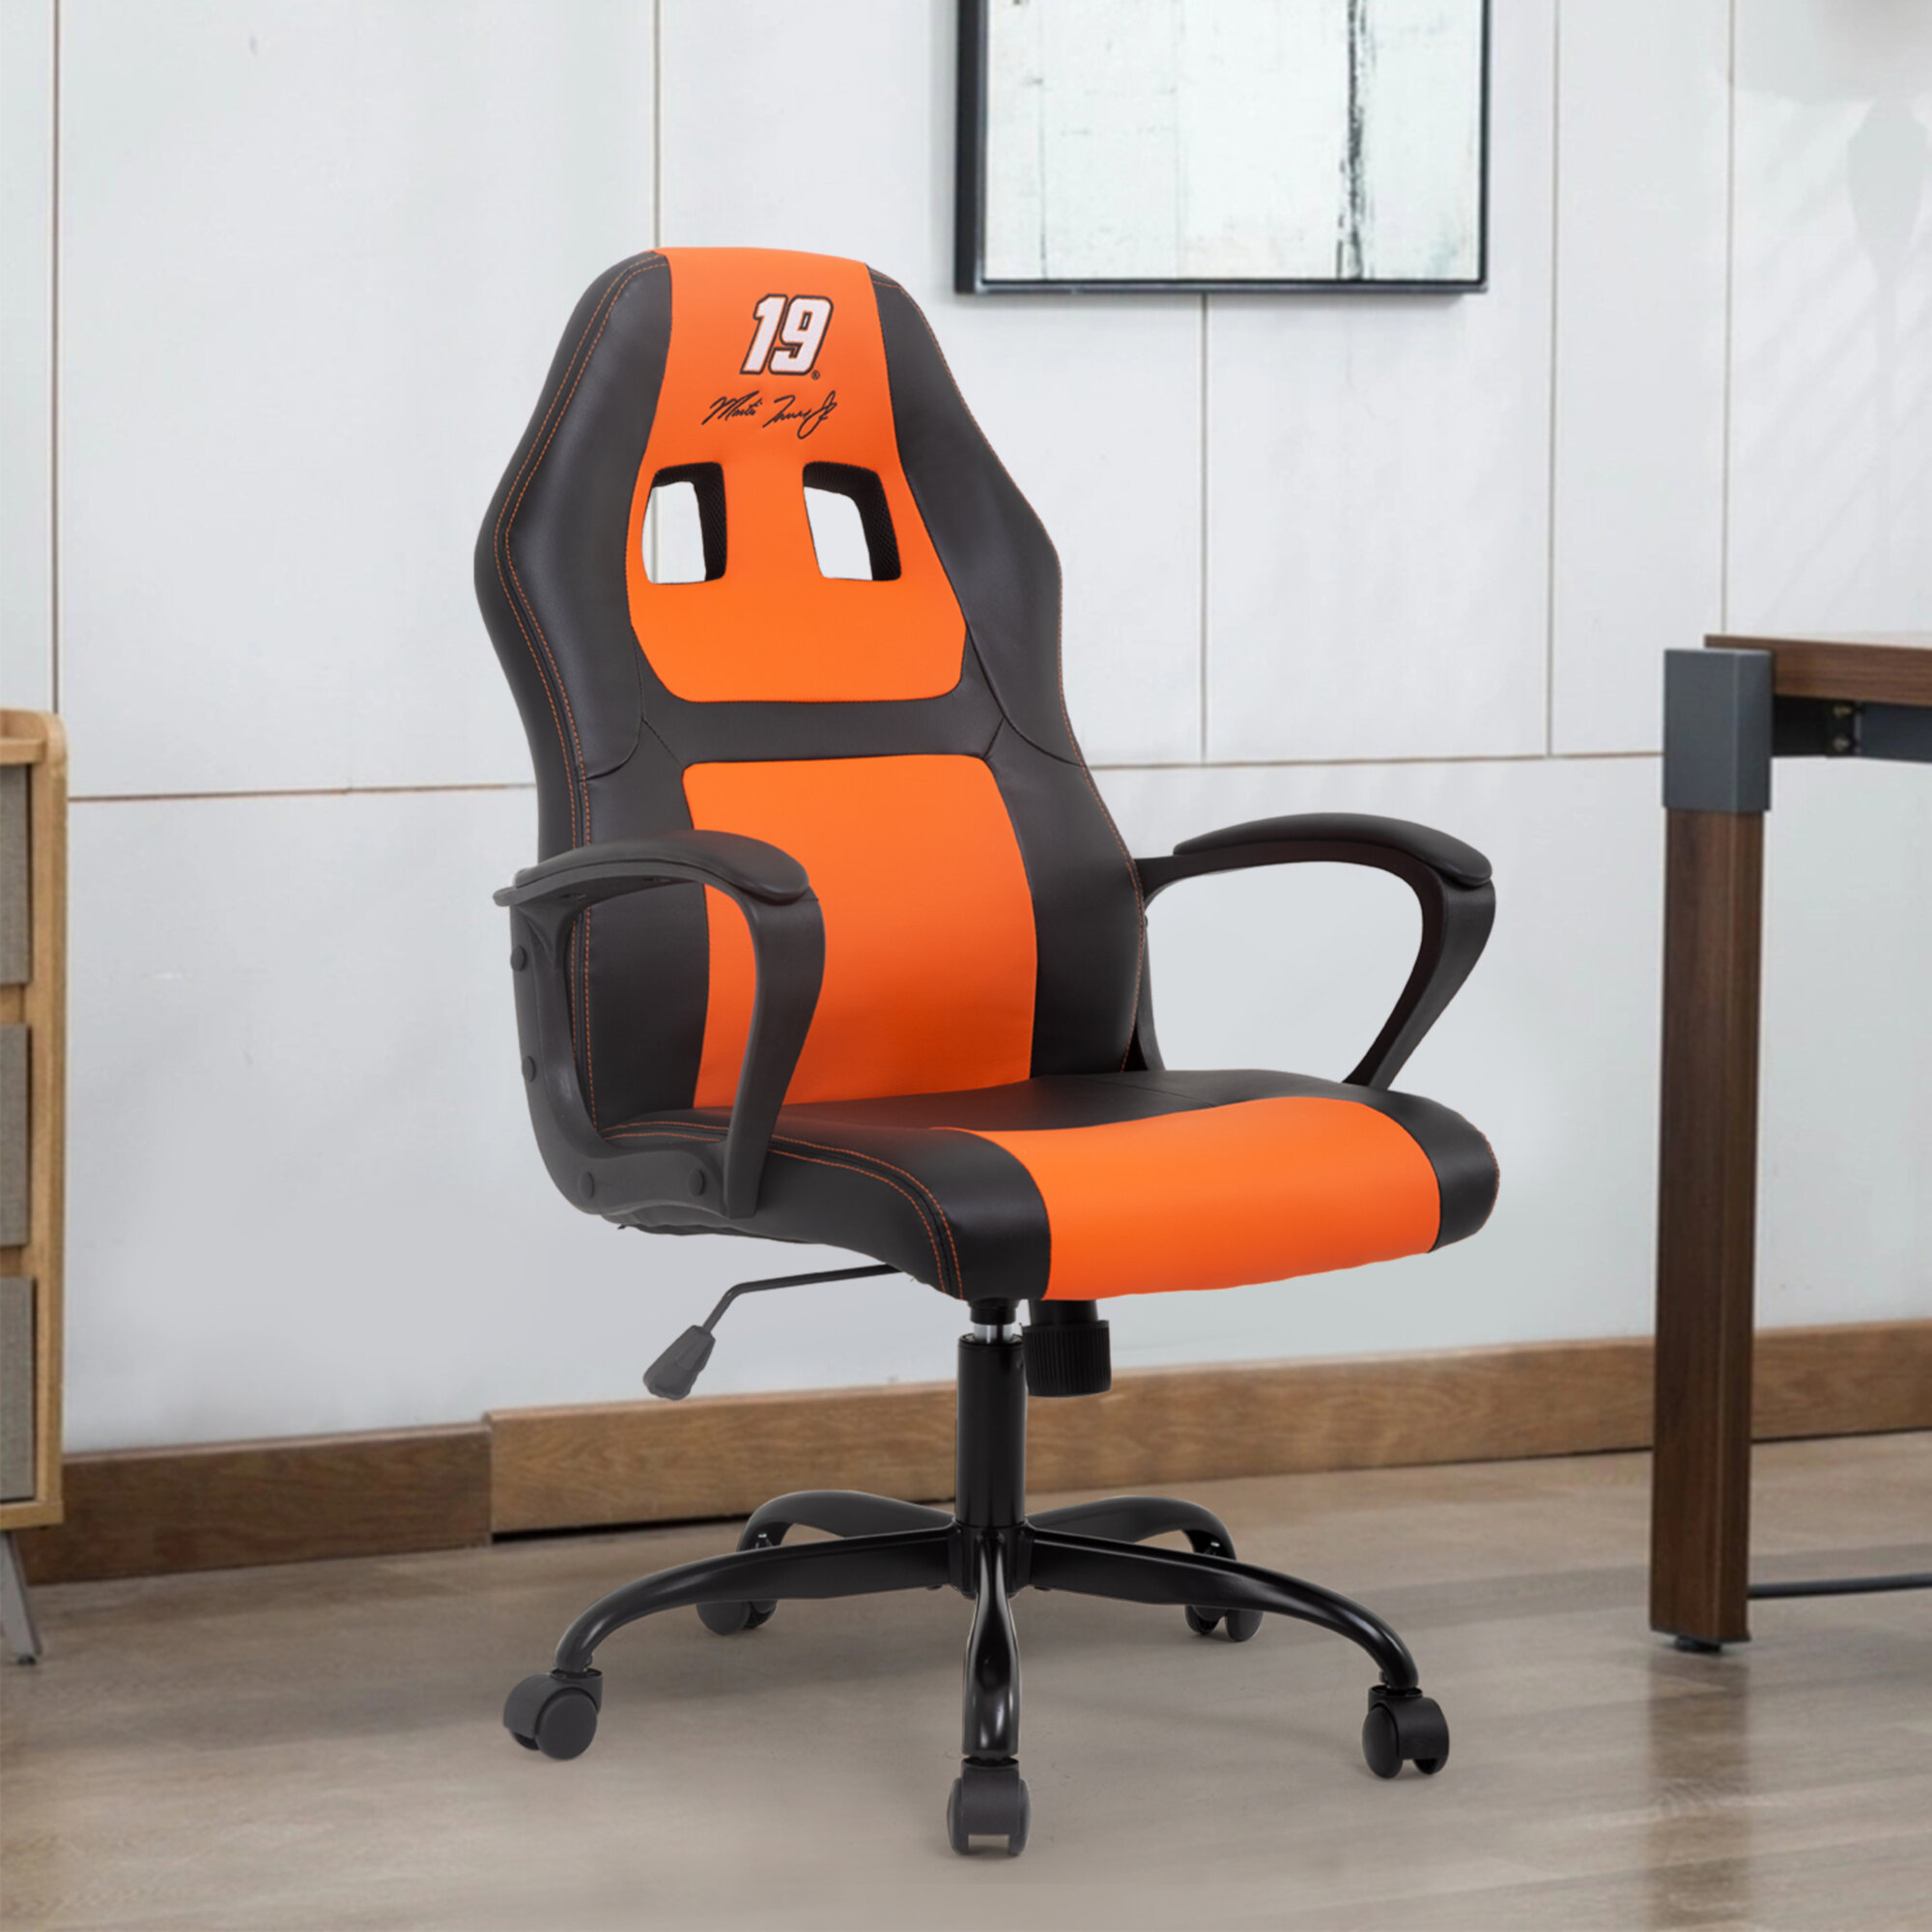 Executive Office Chair Racing Gaming Chair PU Leather Computer Swivel Desk Seat 